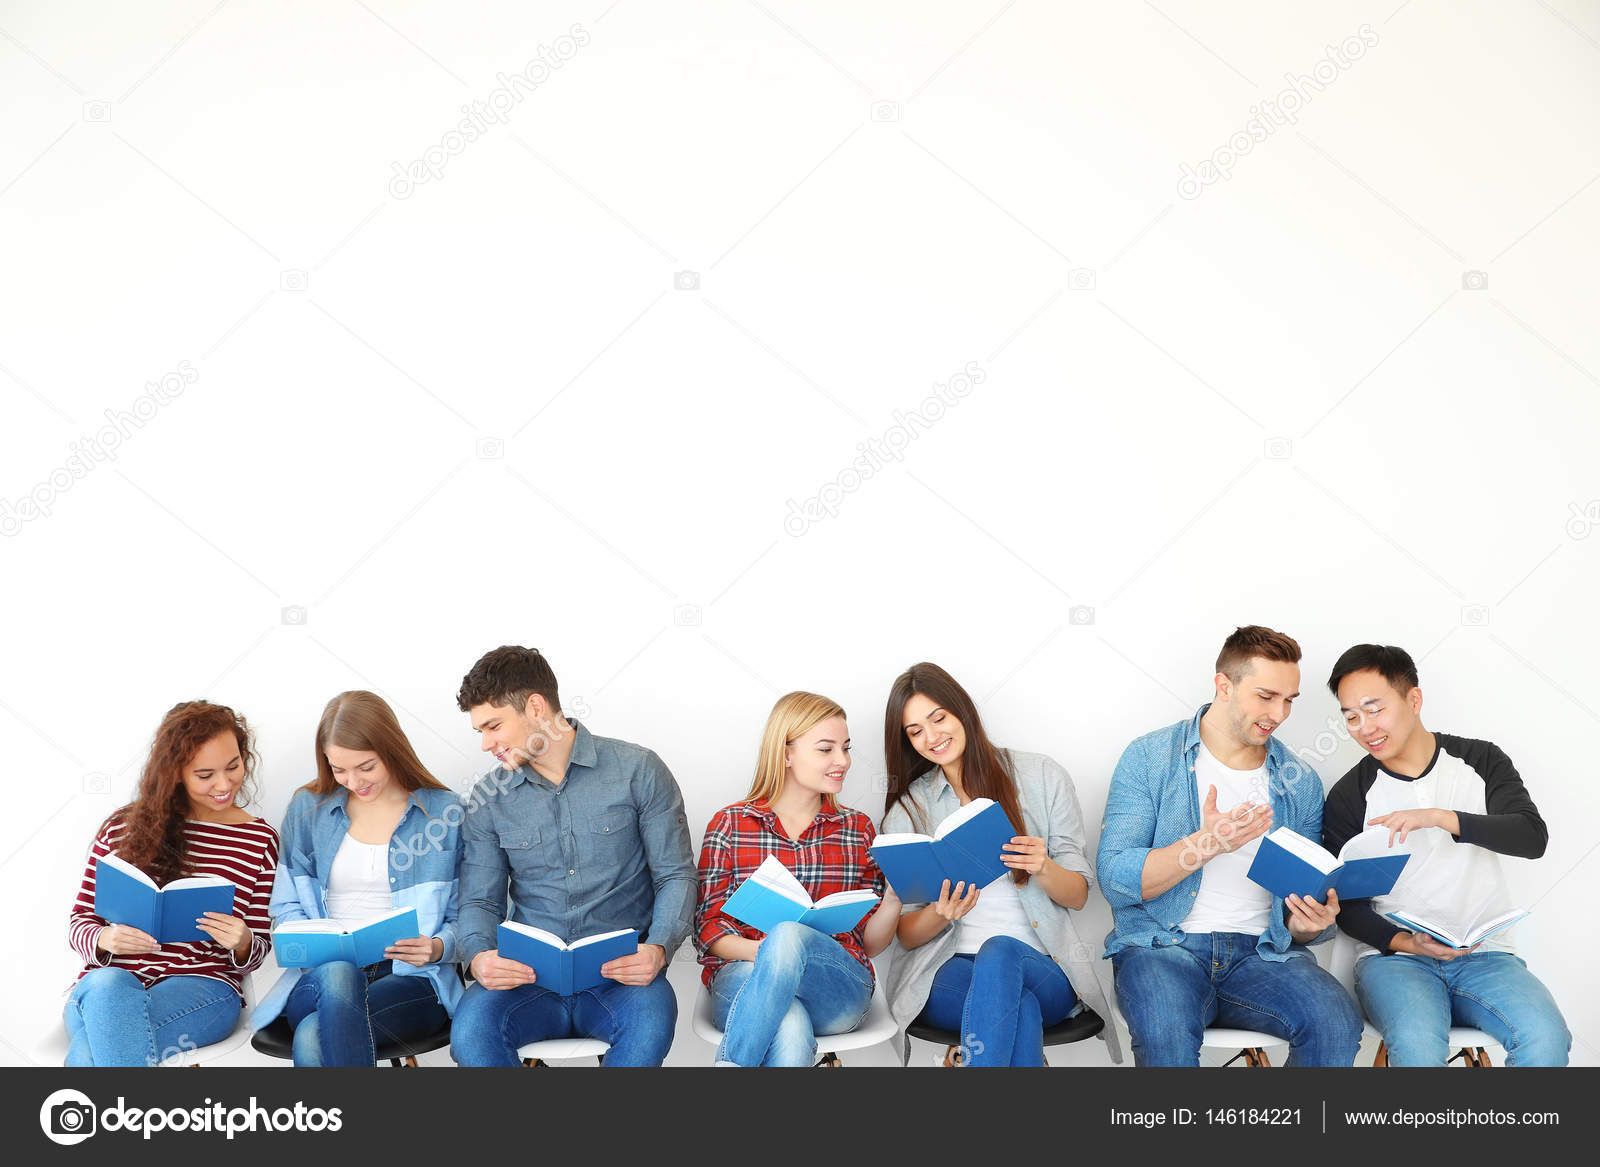 Group of people reading books Stock Photo by ©belchonock 146184221